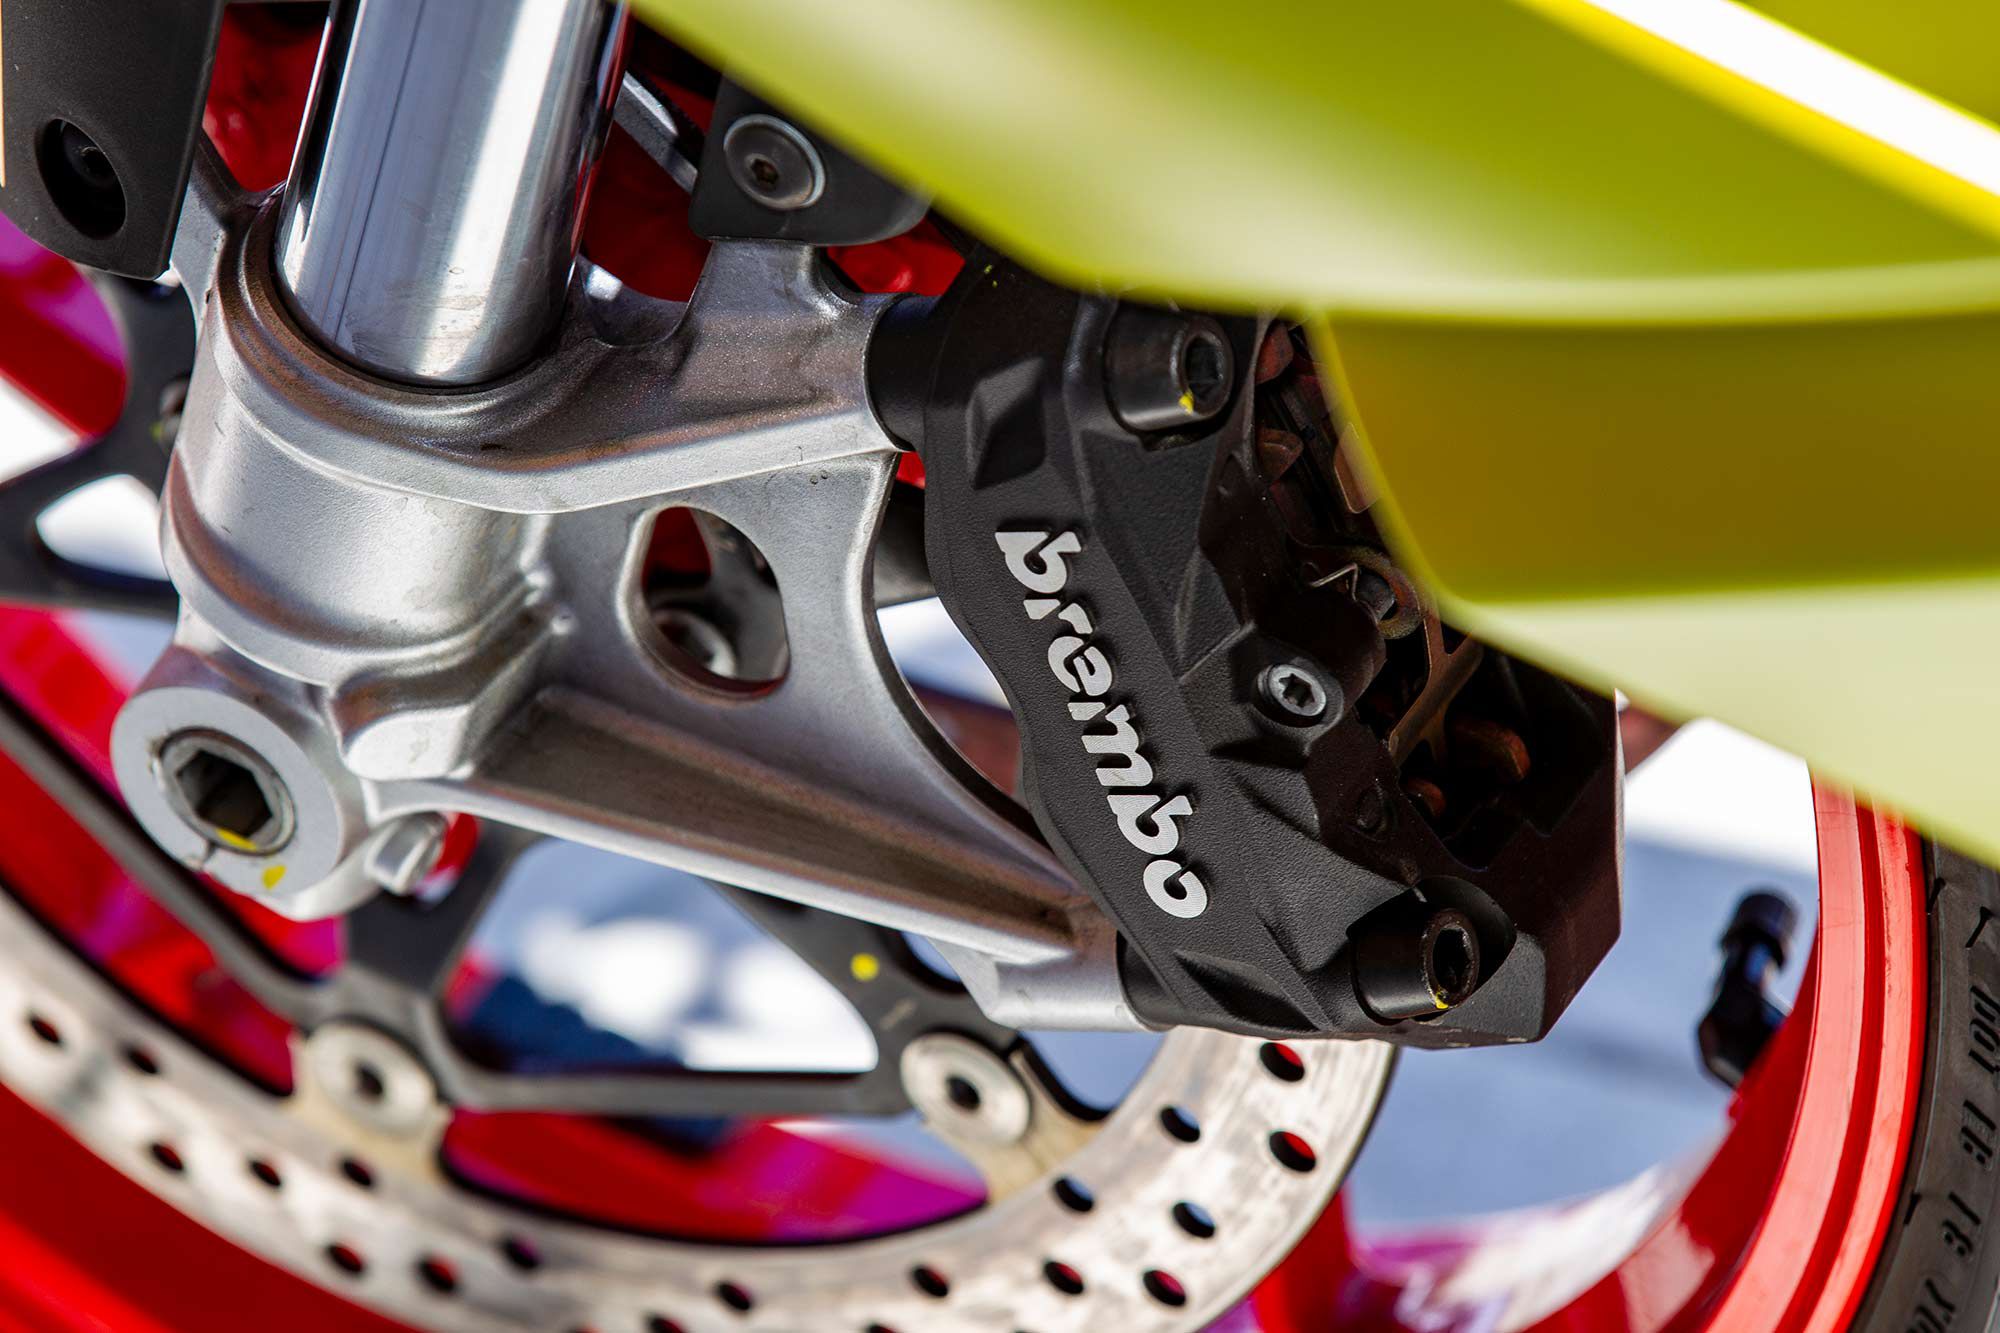 Brembo monoblock calipers are employed to provide the RS 660 stopping power. Combined with the adjustable engine brake management system, deceleration is quick and confidence inspiring.